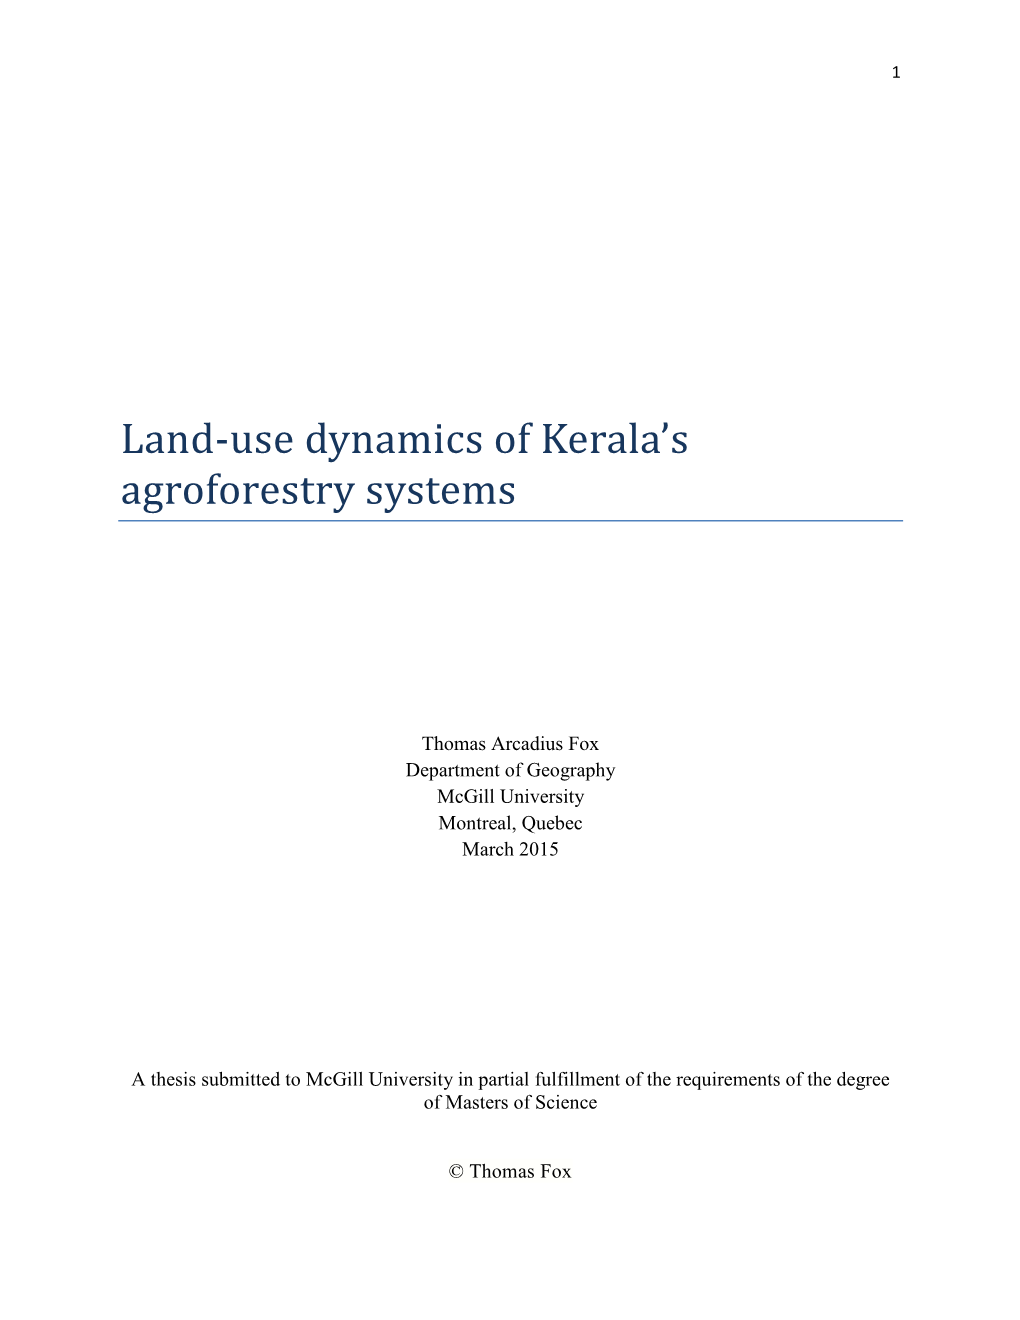 Land-Use Dynamics of Kerala's Agroforestry Systems